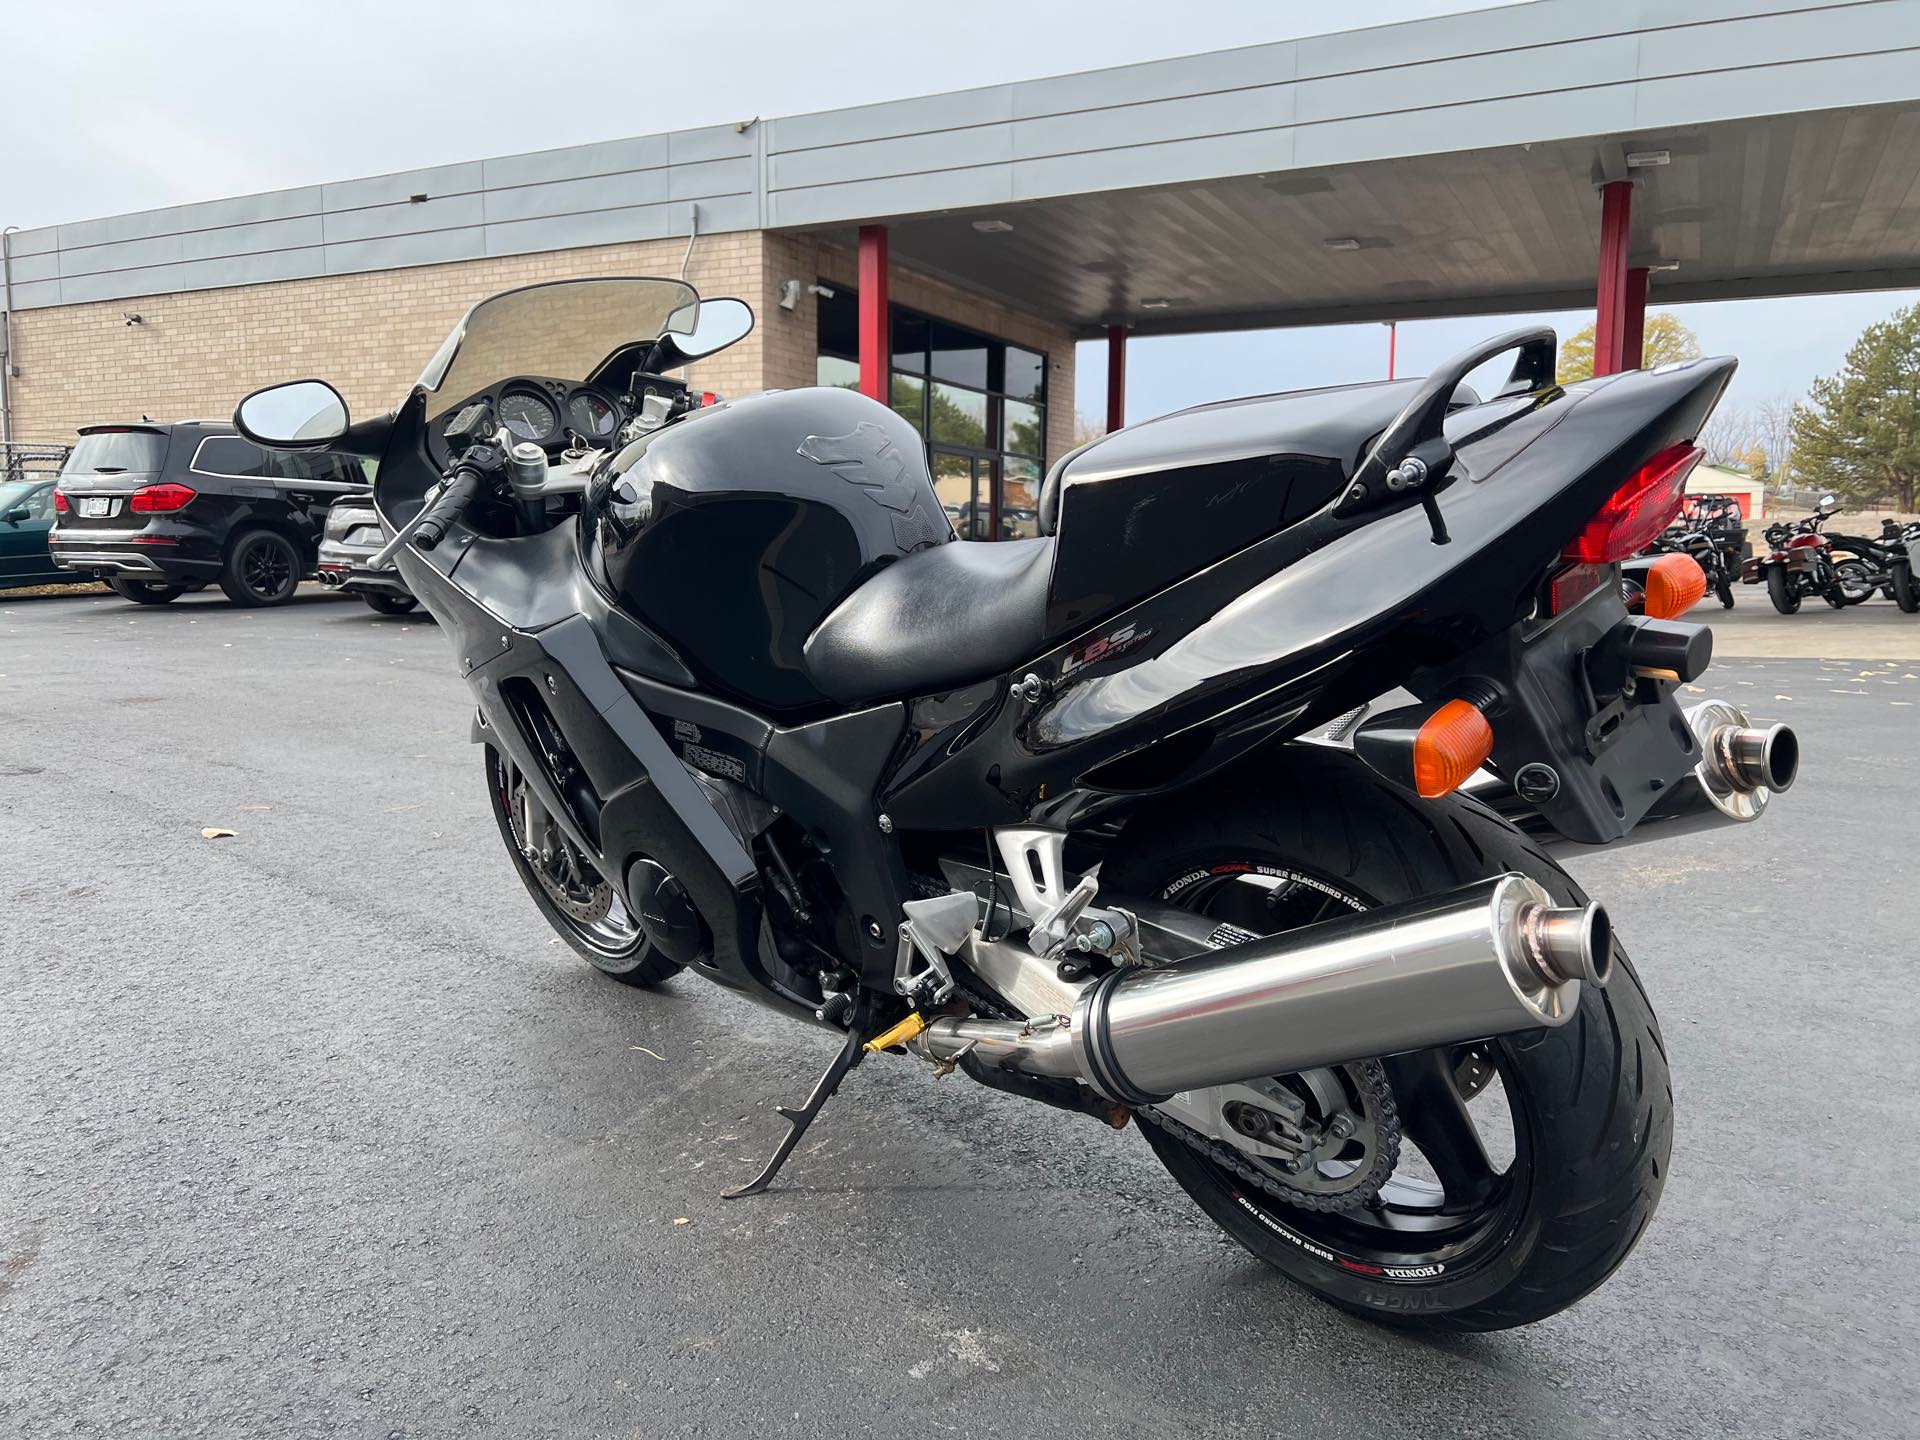 1997 HONDA CBR 1100X4 at Aces Motorcycles - Fort Collins